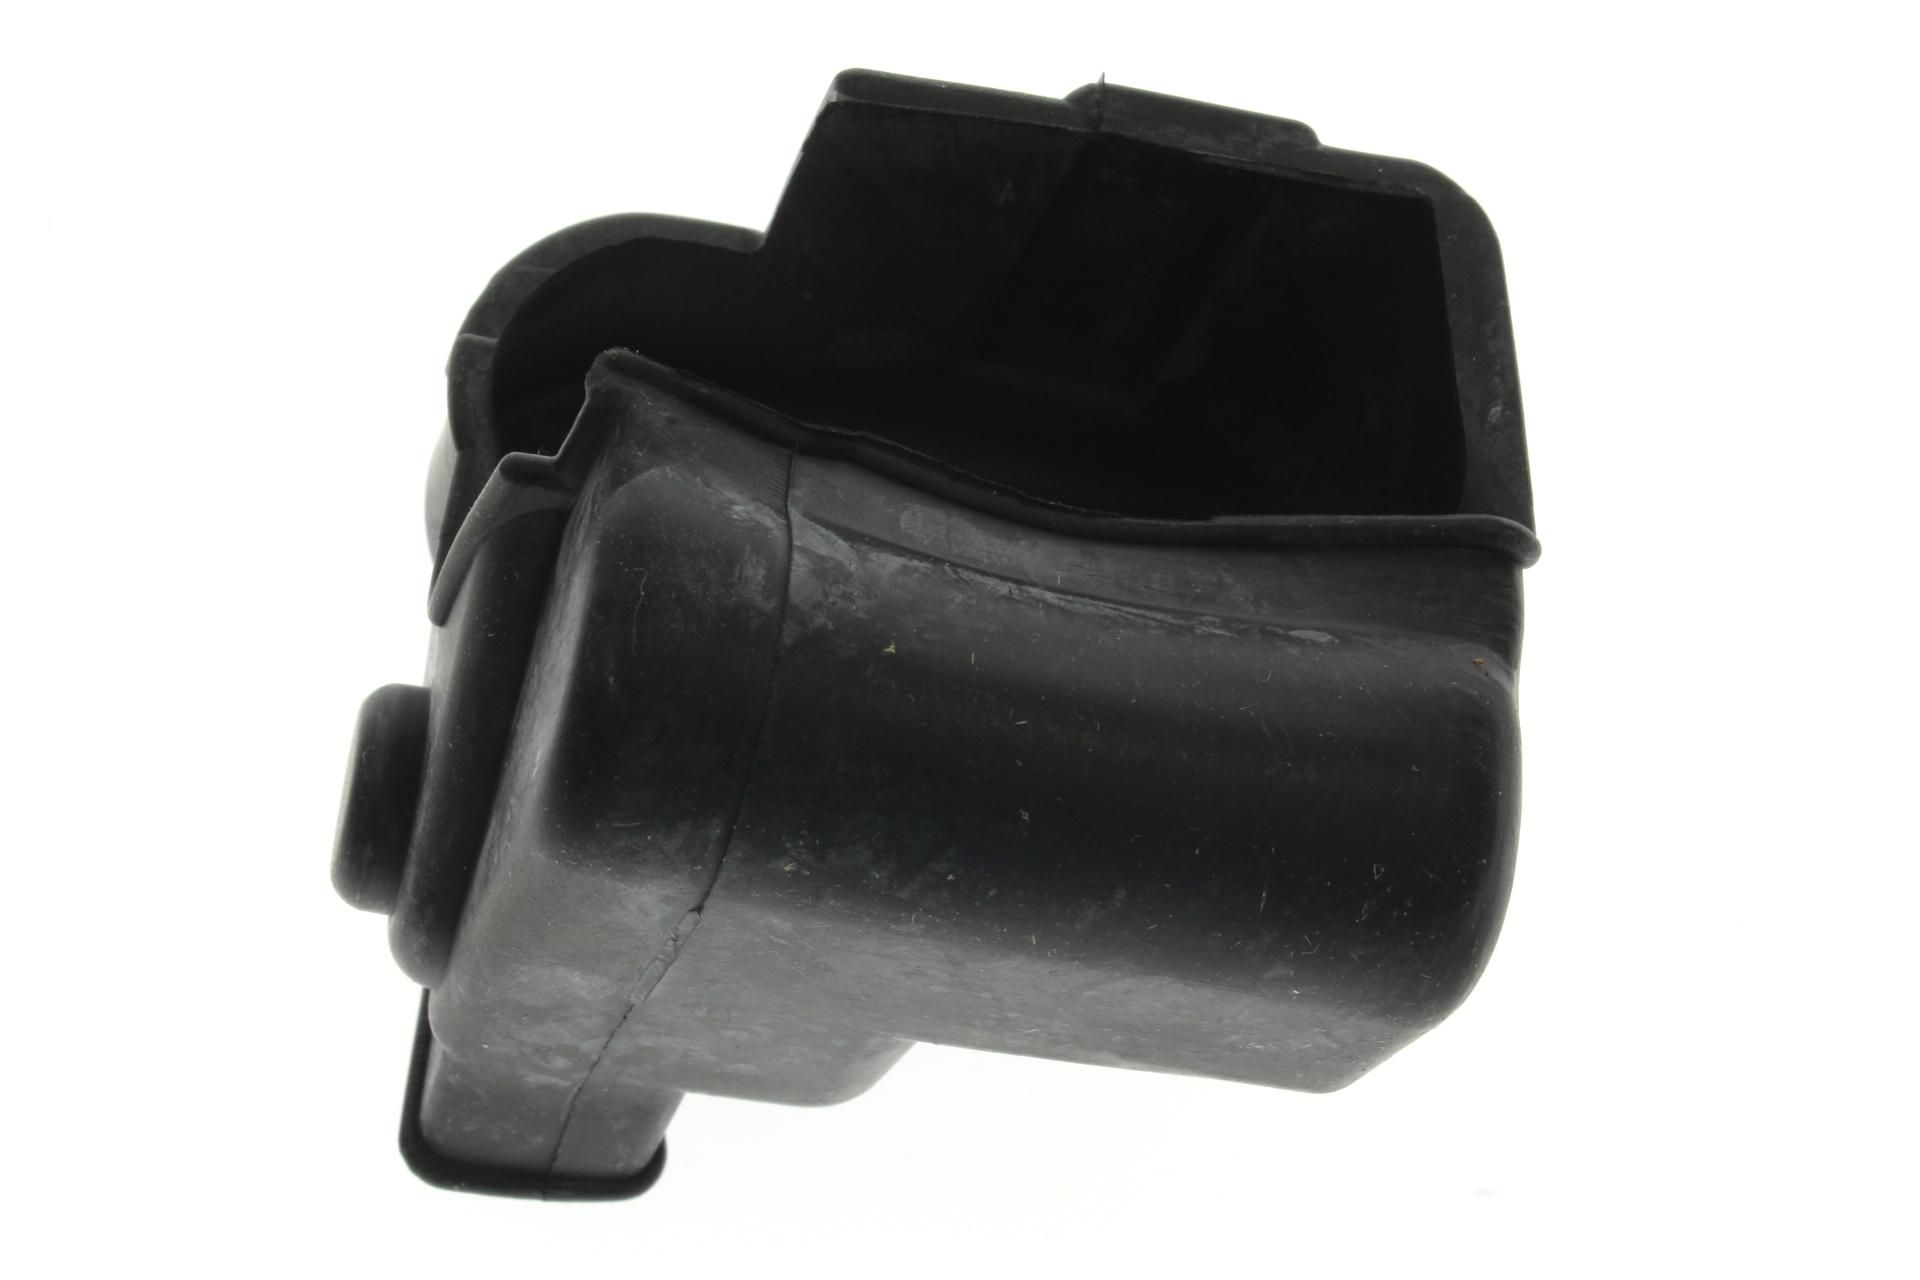 53176-HN8-000 HANDLE COVER